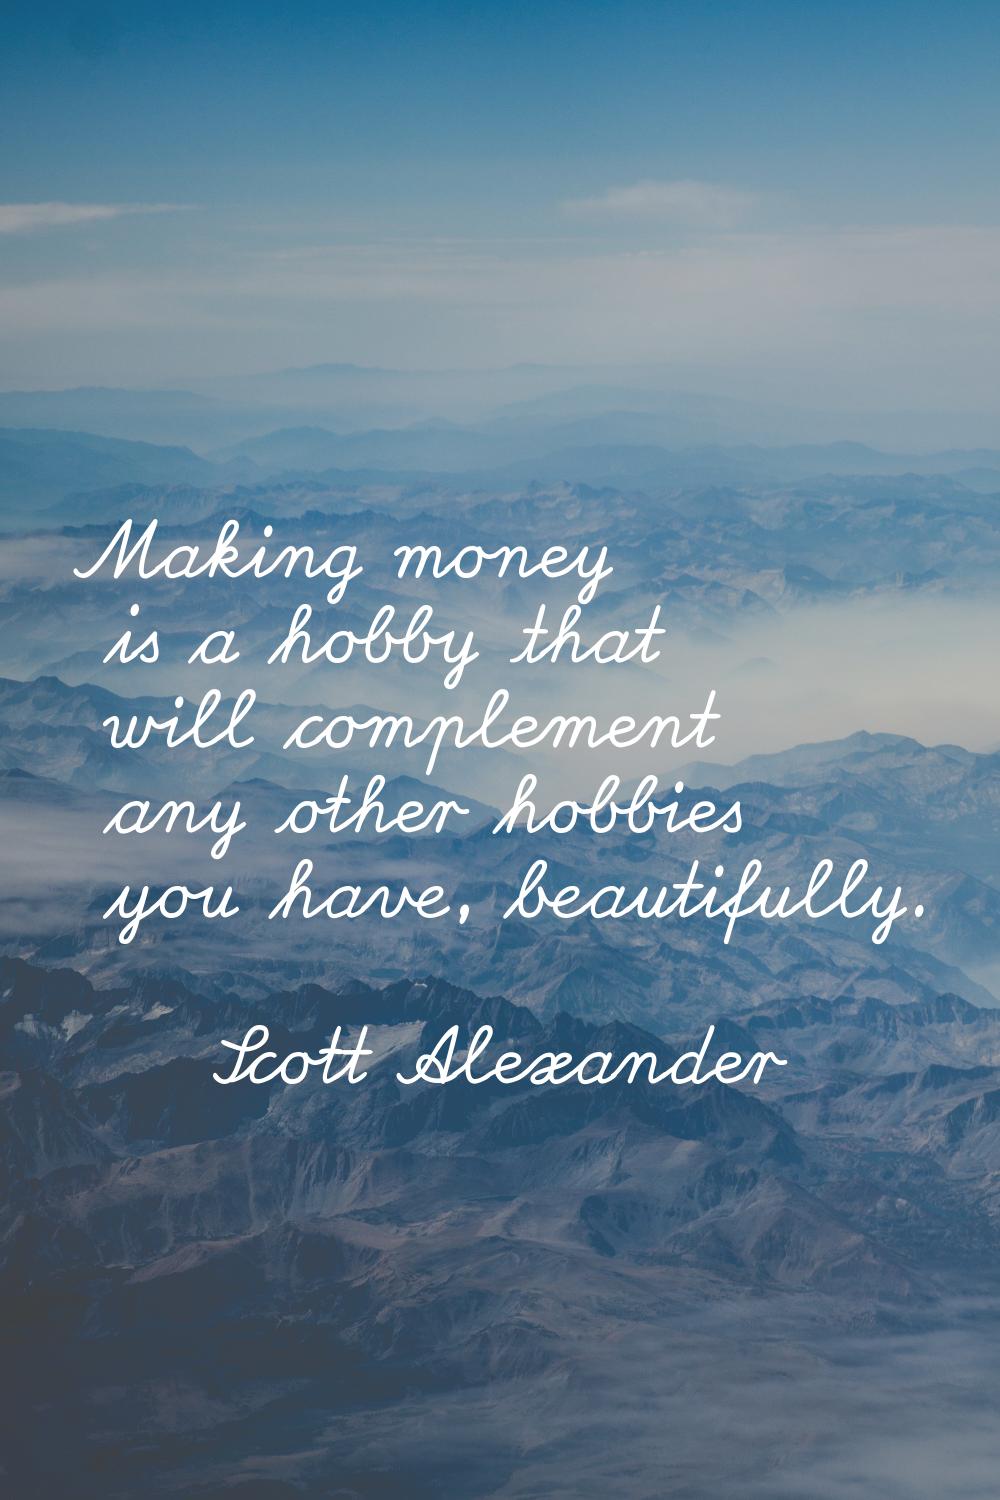 Making money is a hobby that will complement any other hobbies you have, beautifully.